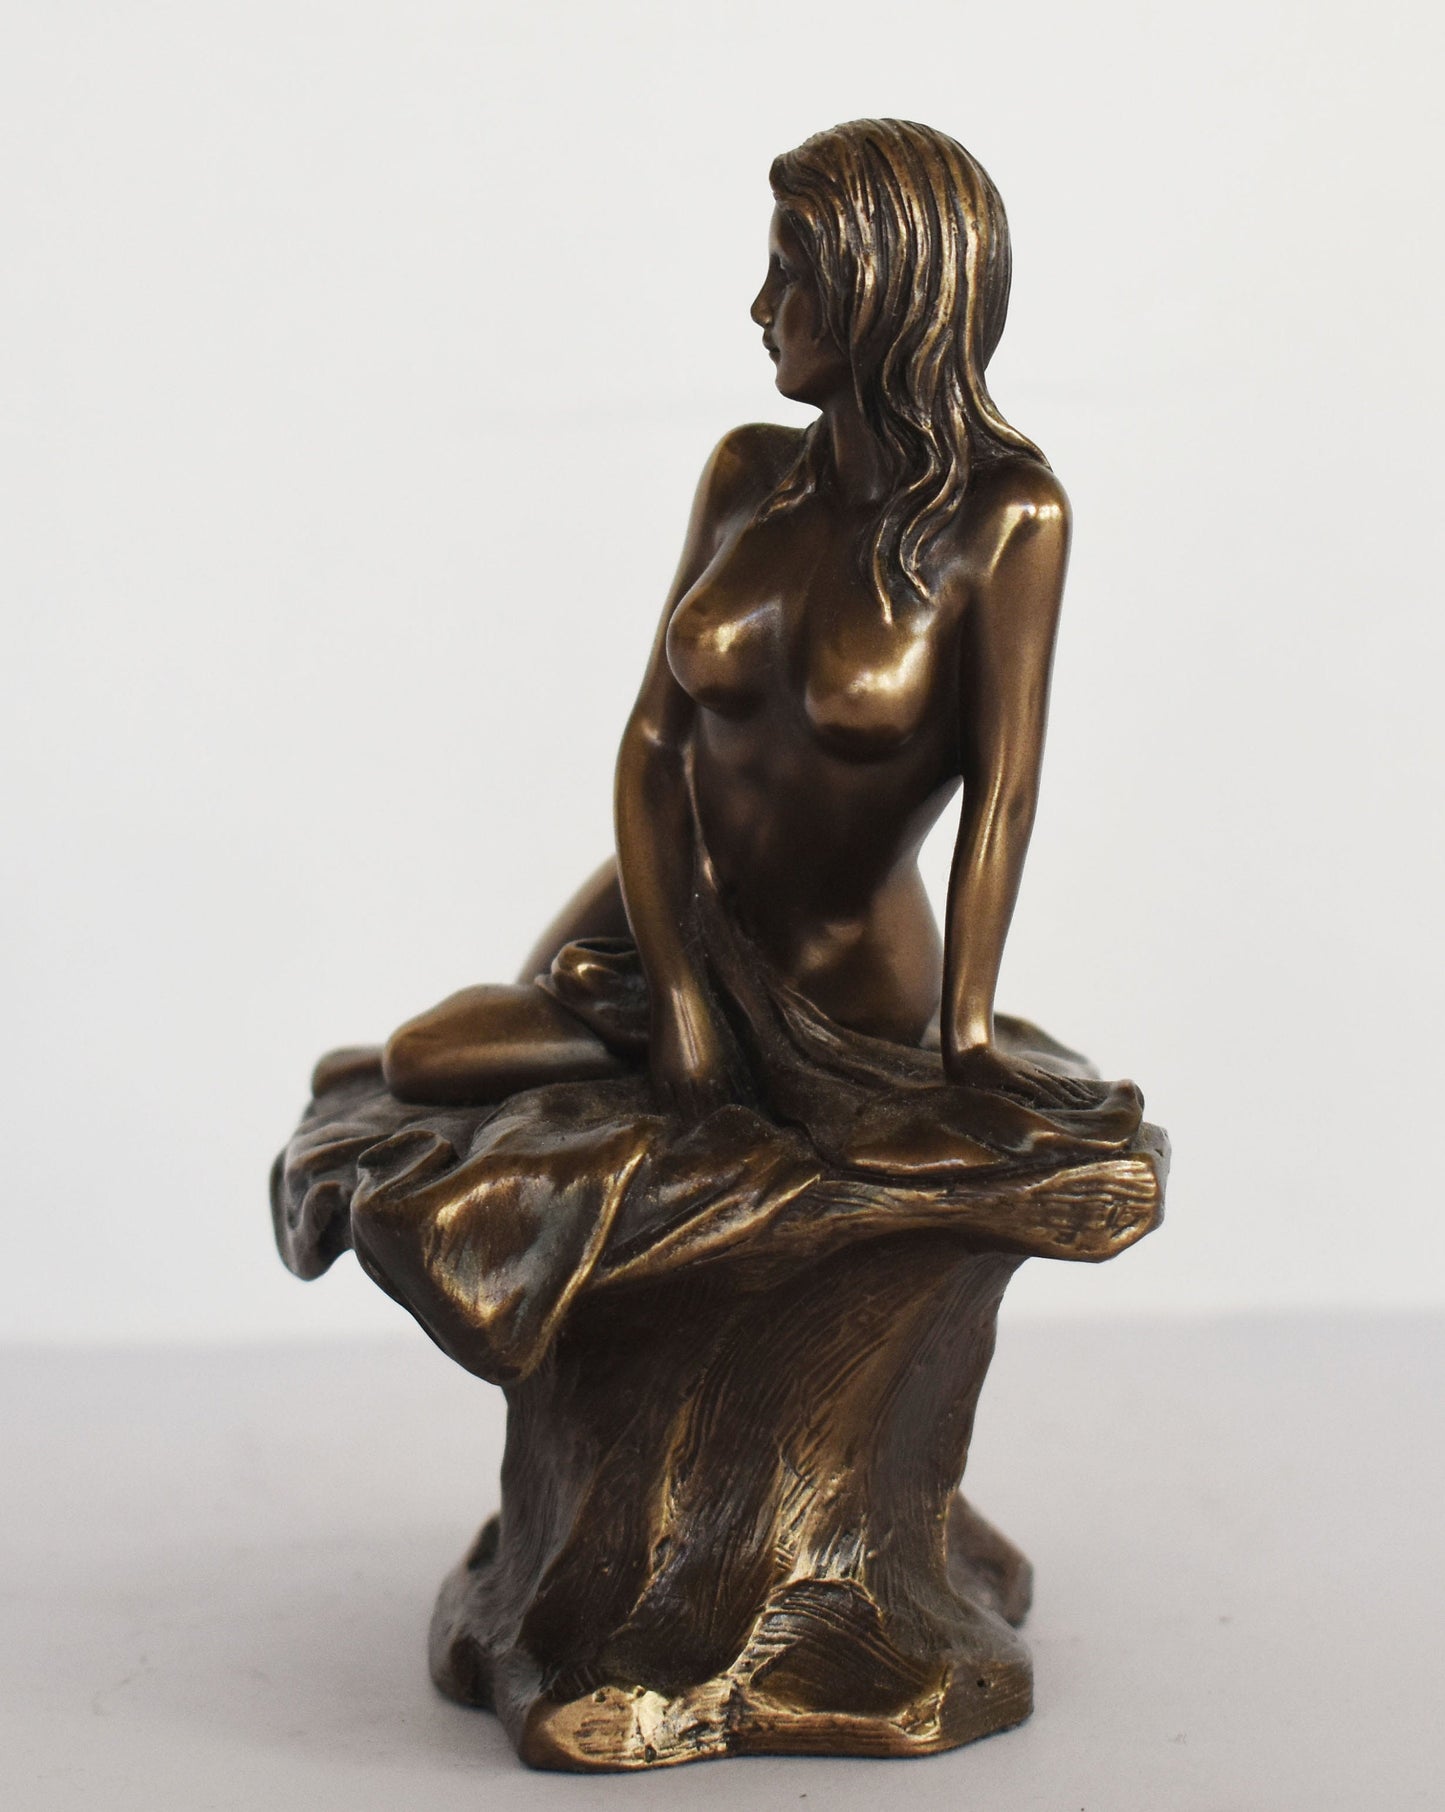 Aphrodite from Cyprus on a Rock - Petra tou Romiou - Mythical Birthplace - Cold Cast Bronze Resin